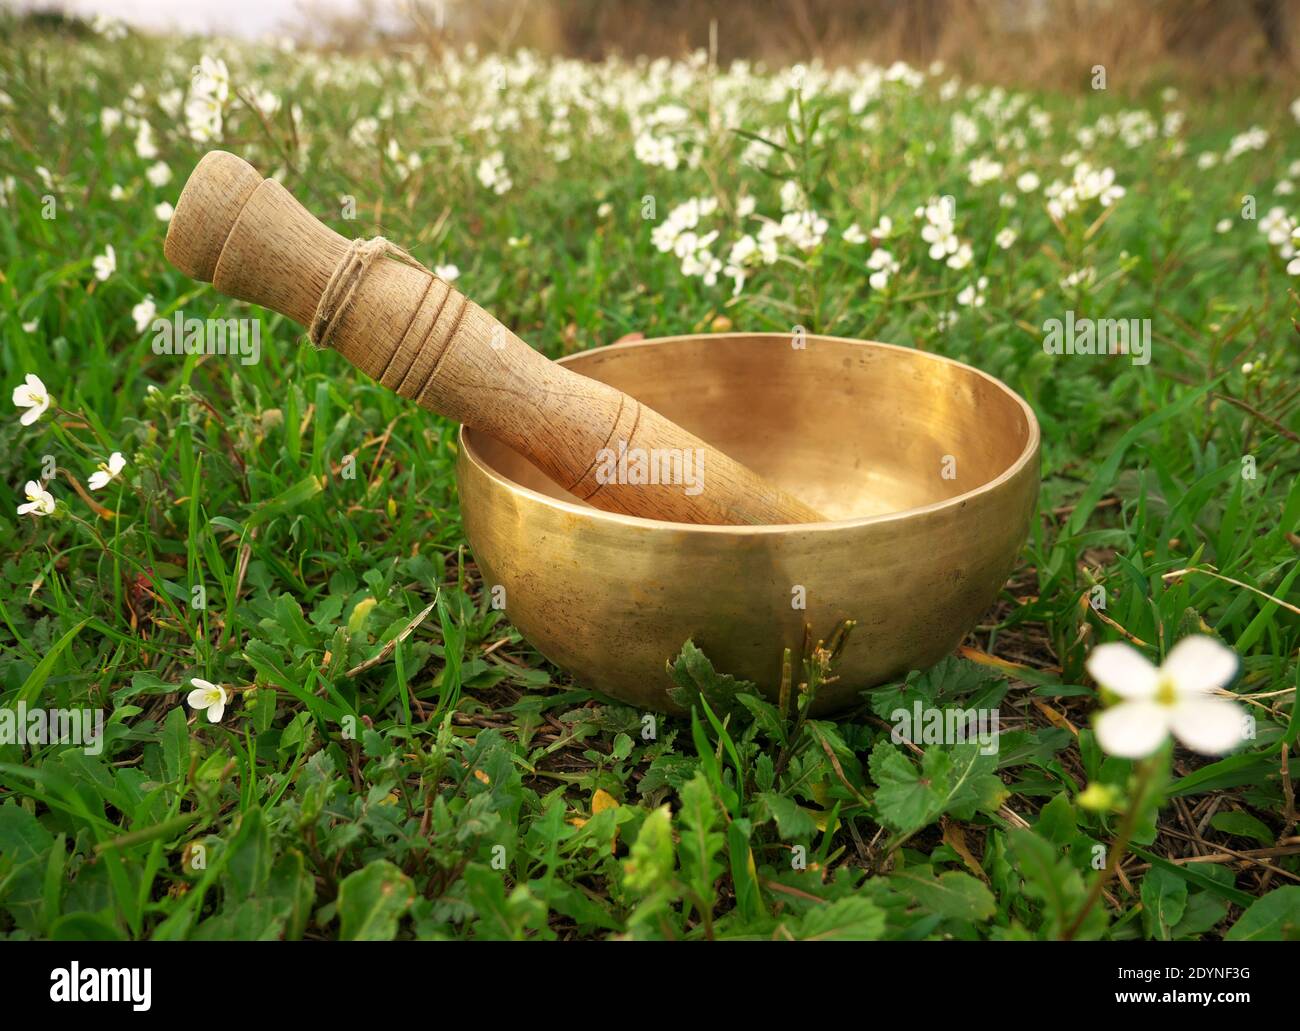 Singing bowl placed in the grass in the middle of small white flowers Stock Photo